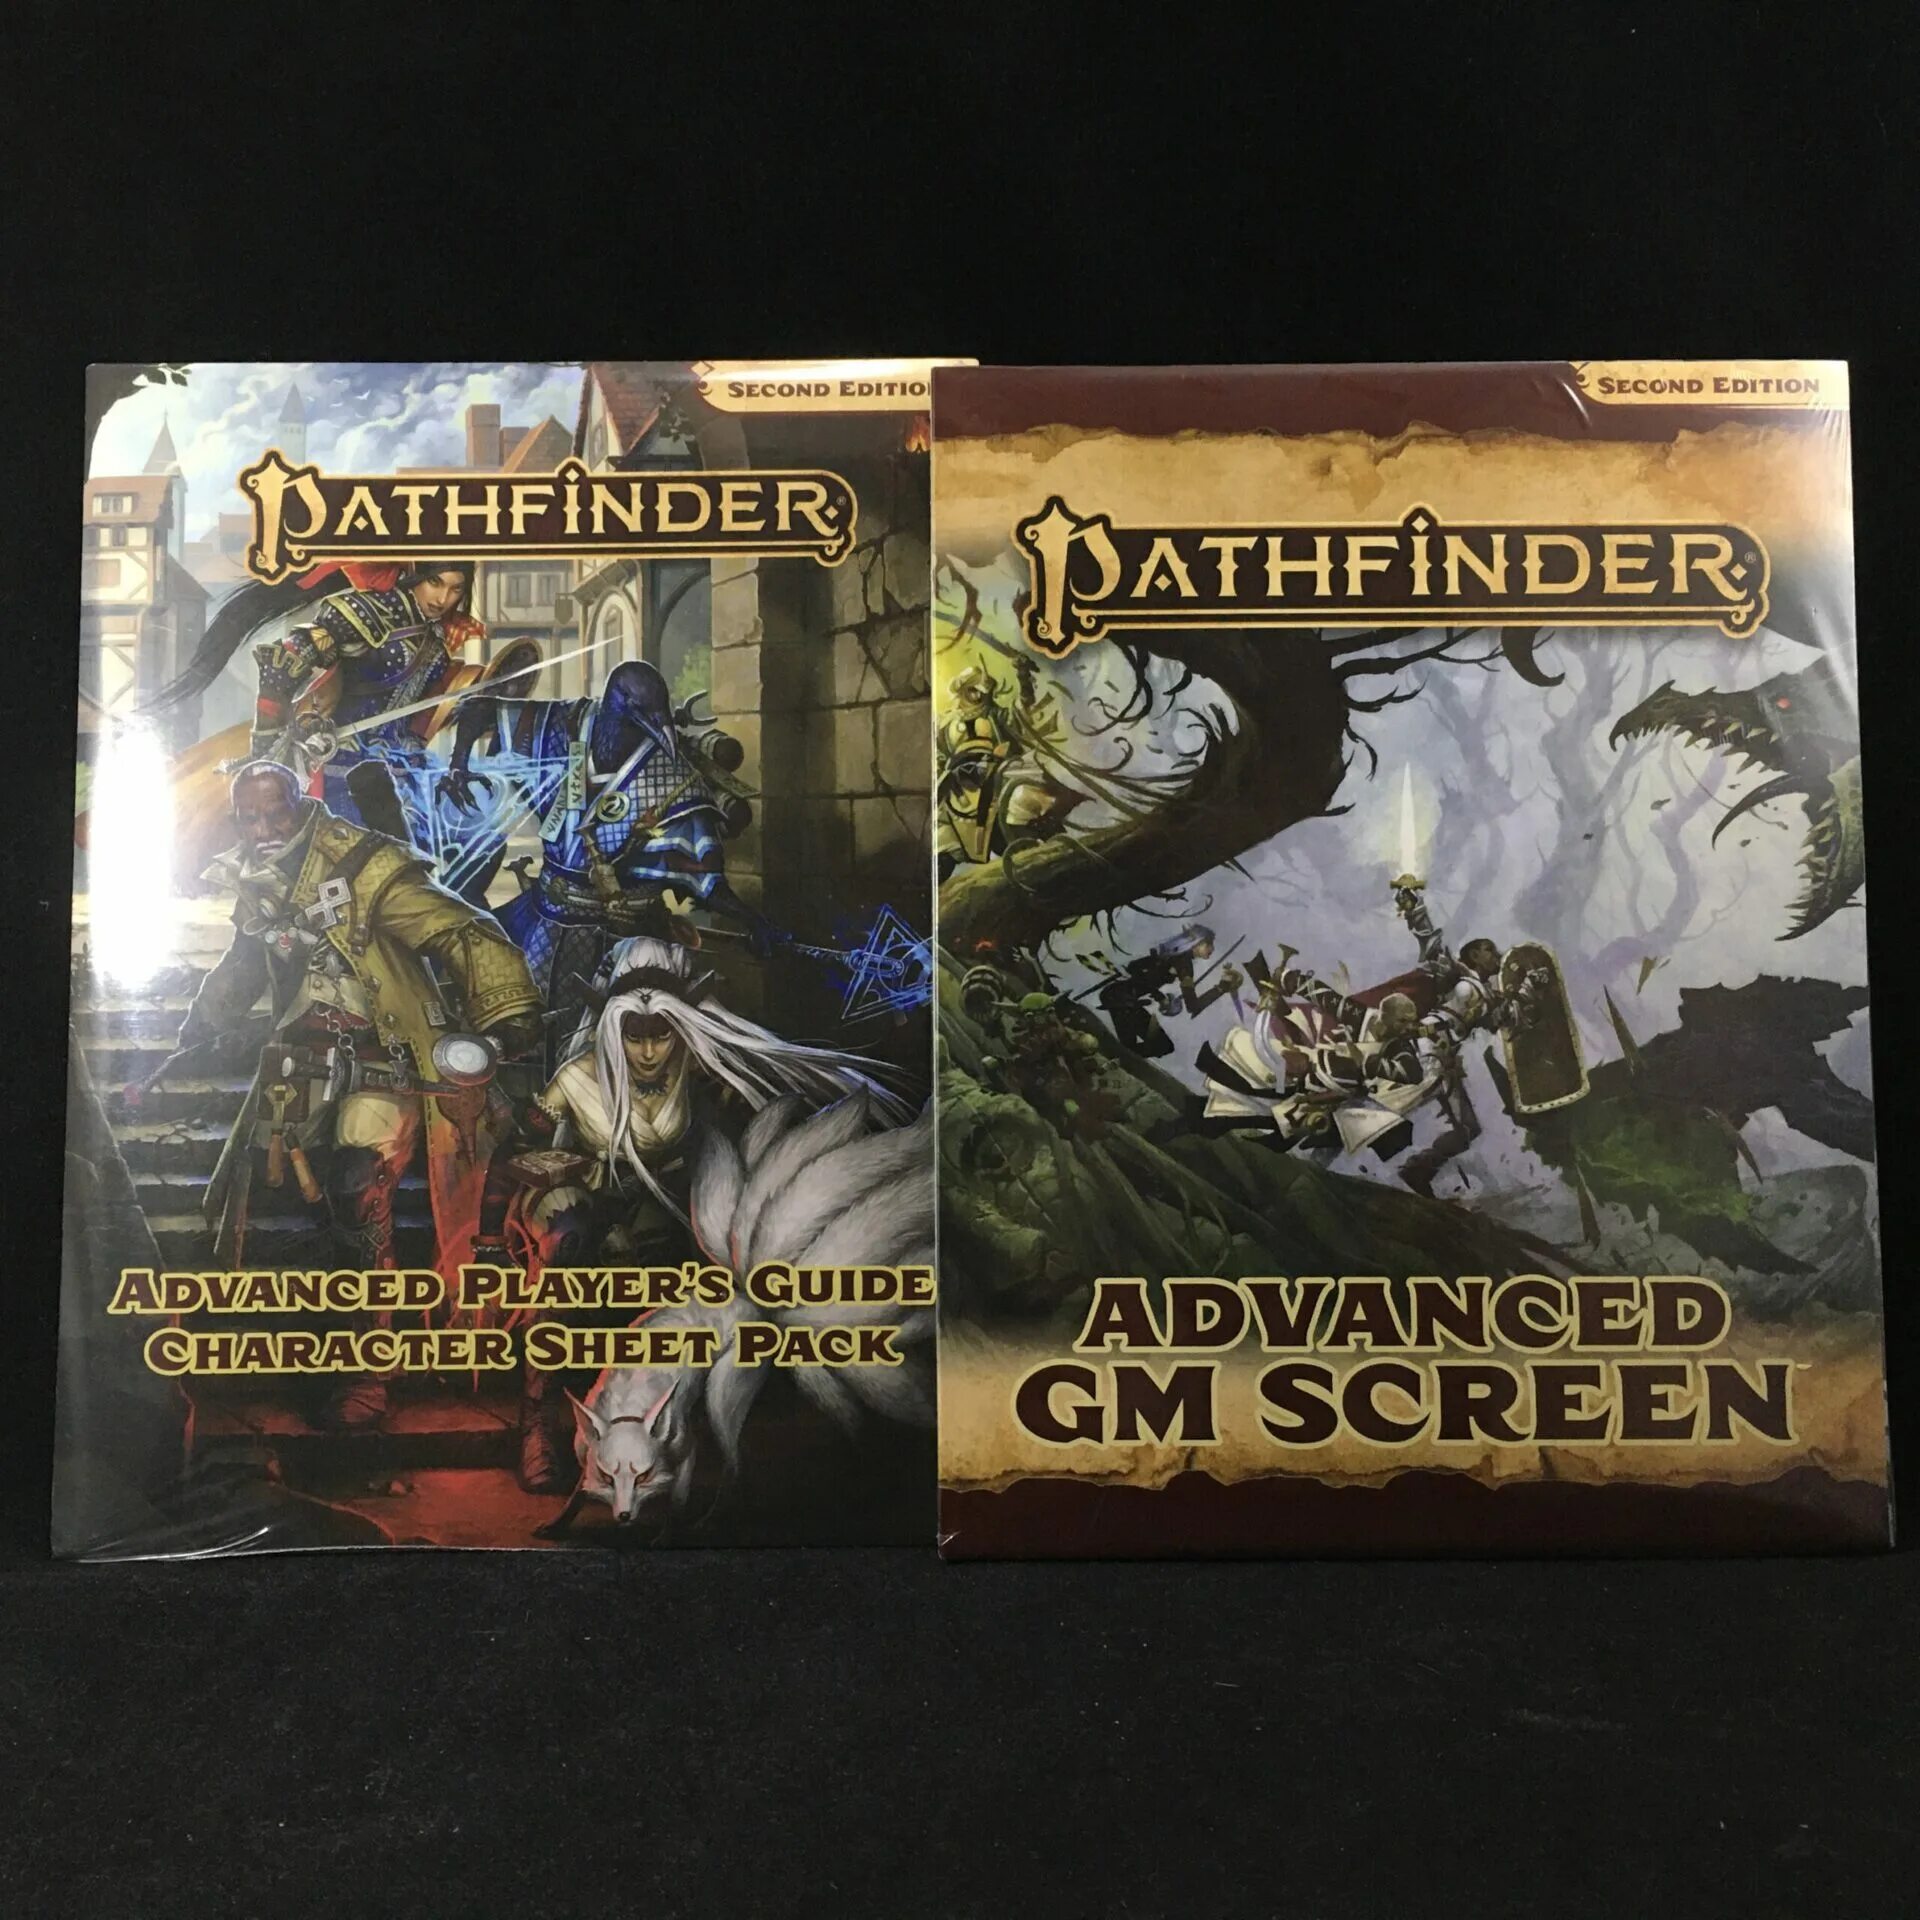 Pathfinder second Edition. Advanced Player's Guide Pathfinder. Pathfinder 2 Pocket Edition. Advanced Player's Guide PG. 13 Pathfinder.